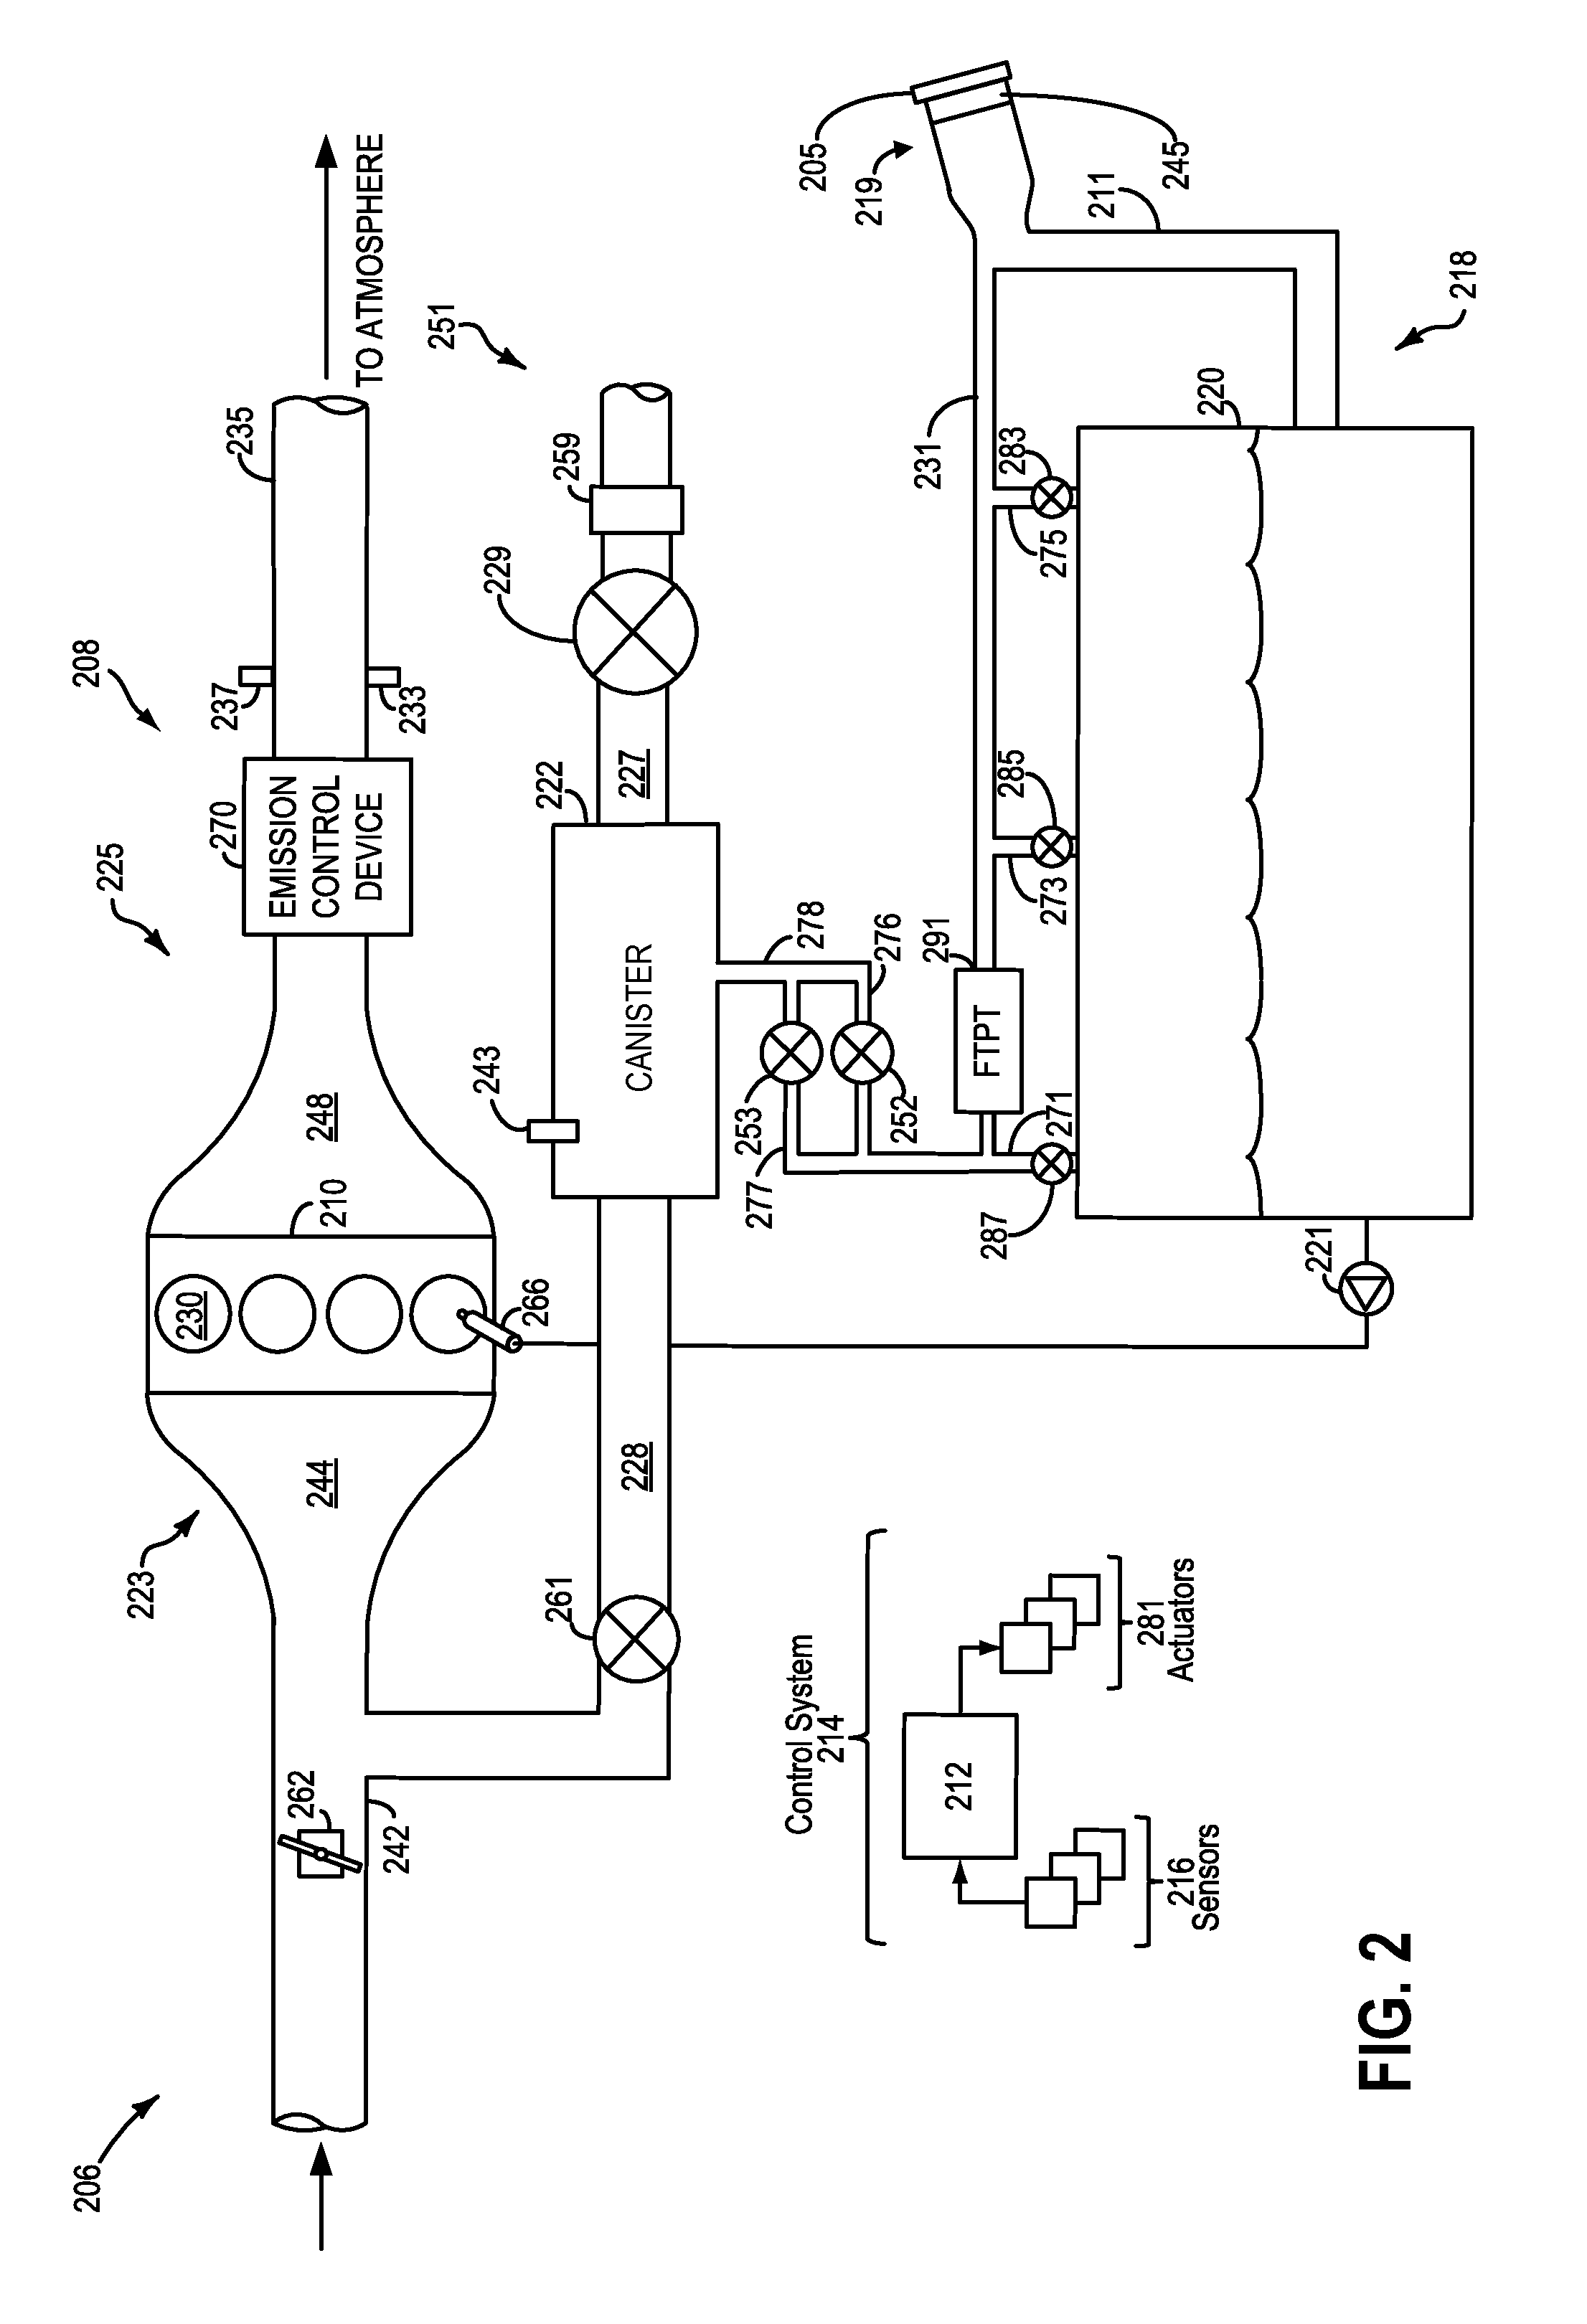 Systems and methods for depressurizing a fuel tank